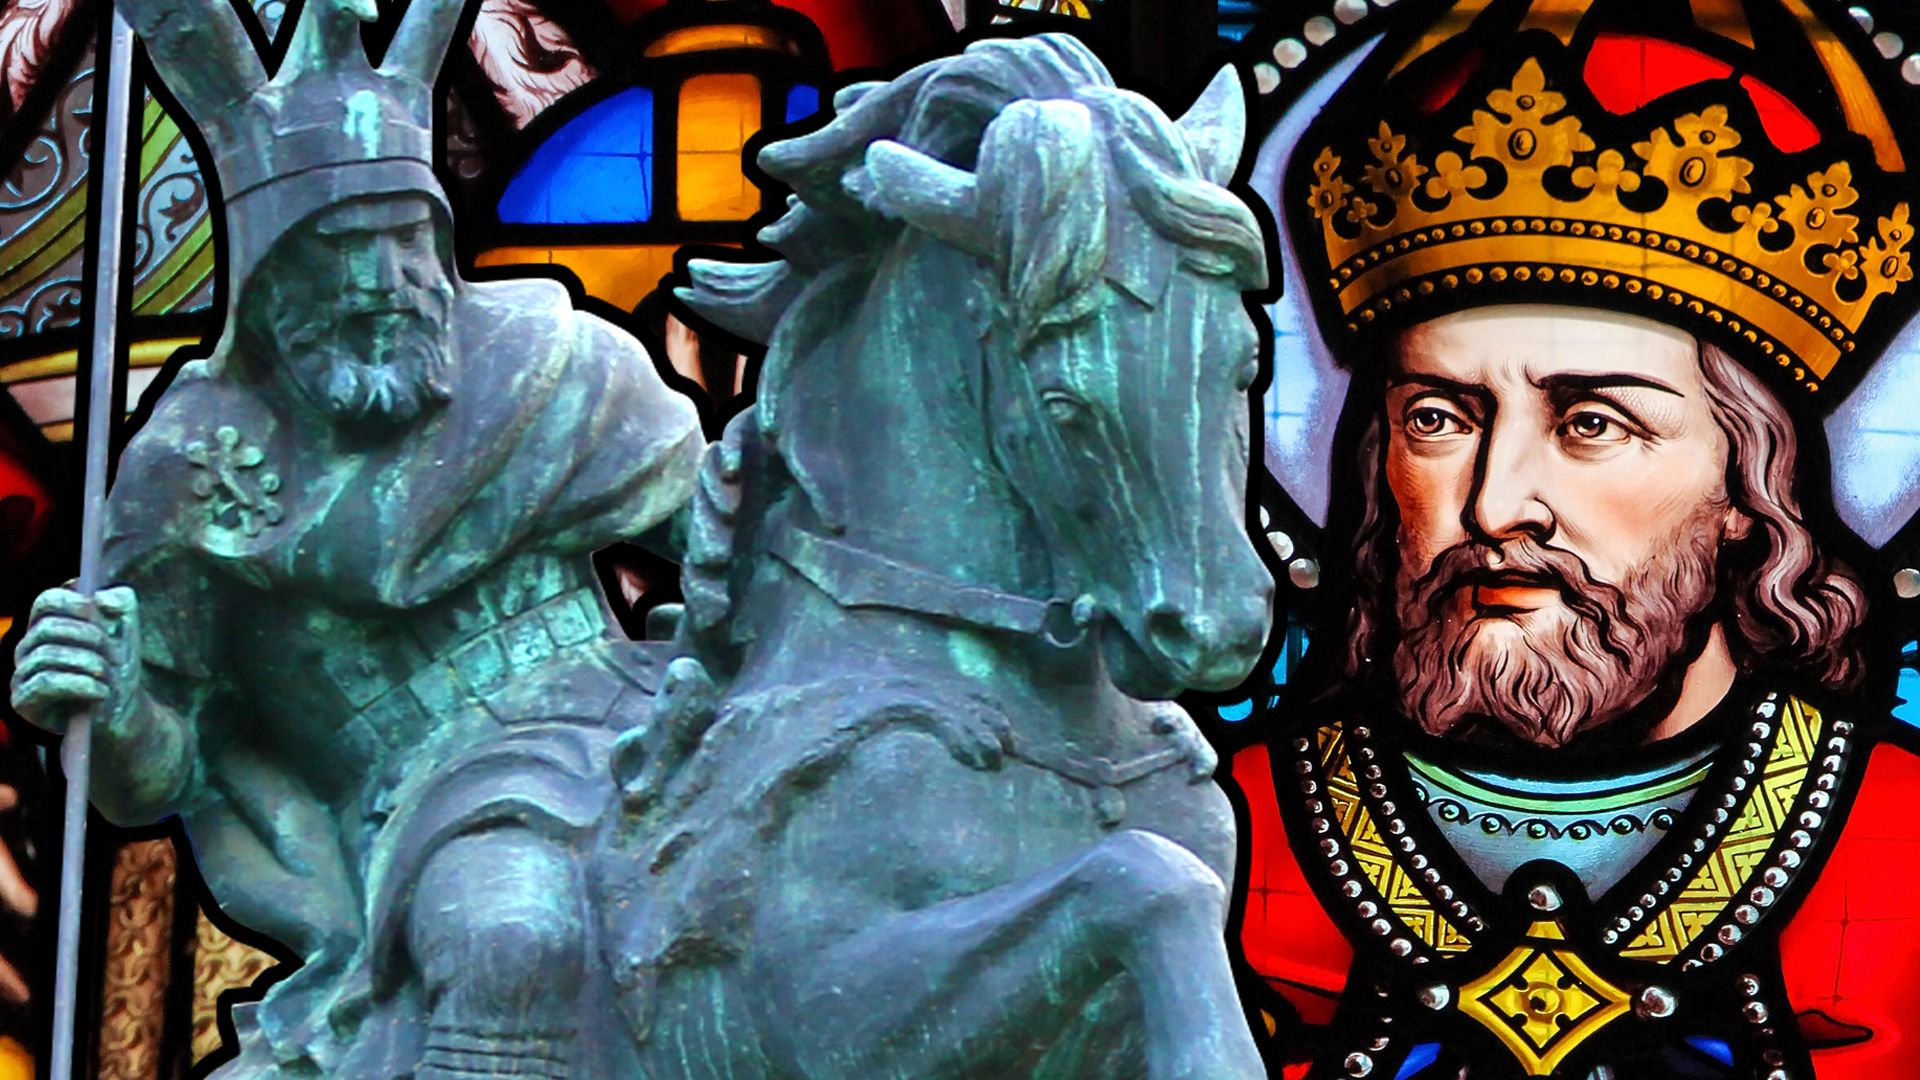 What was Charlemagne's family life like?